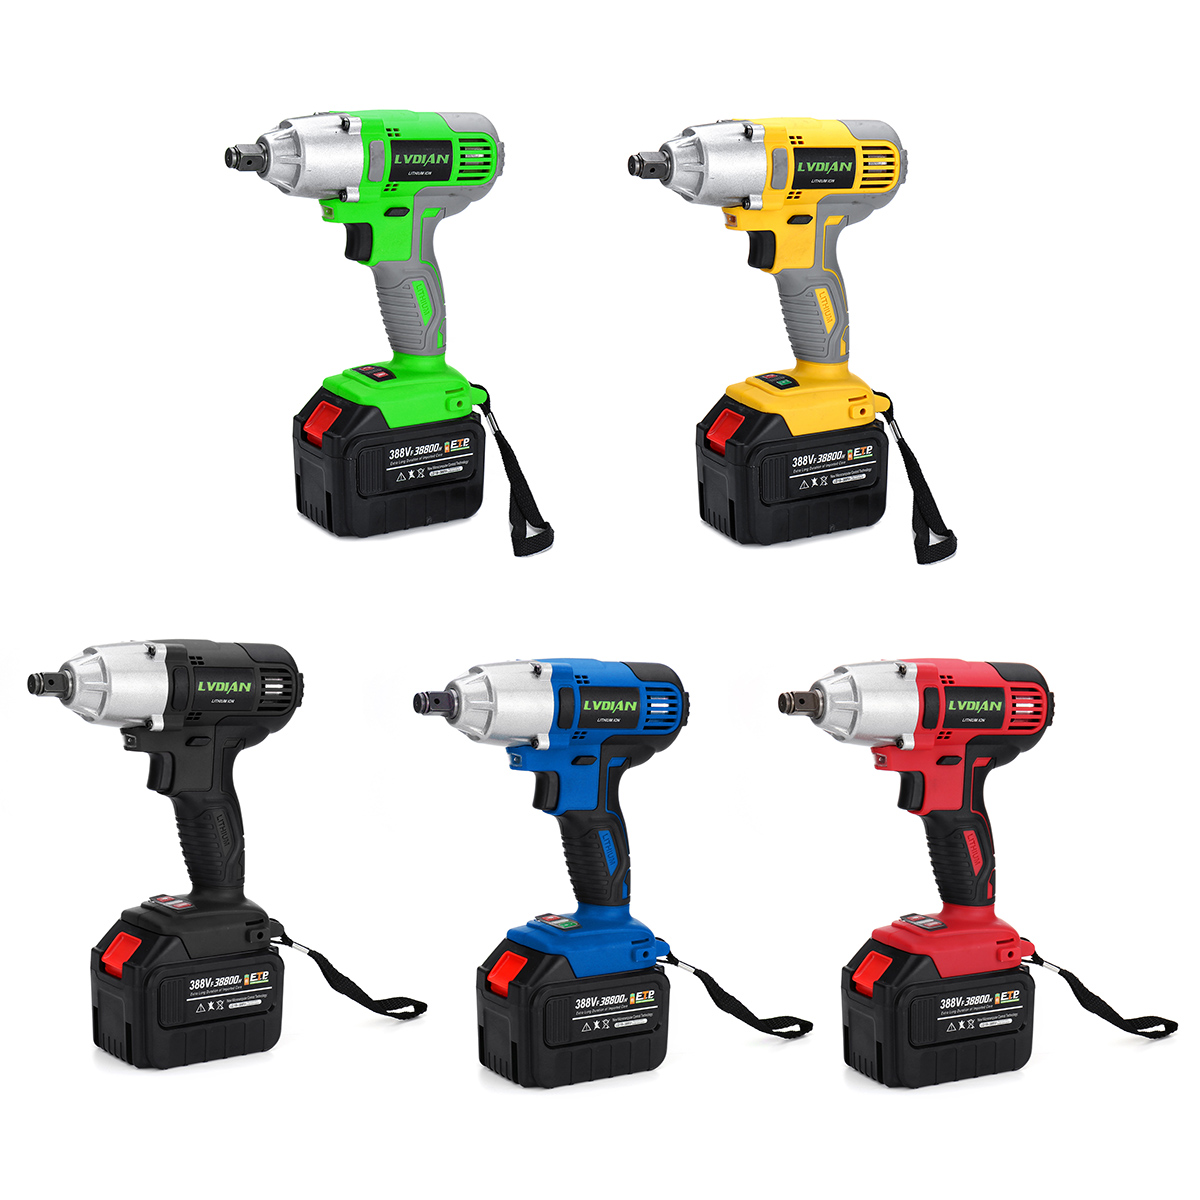 

388VF 38800mAh 1/2 inch Cordless Electric Impact Brushless Wrench Driver Hand Drill with Li-ion Battery